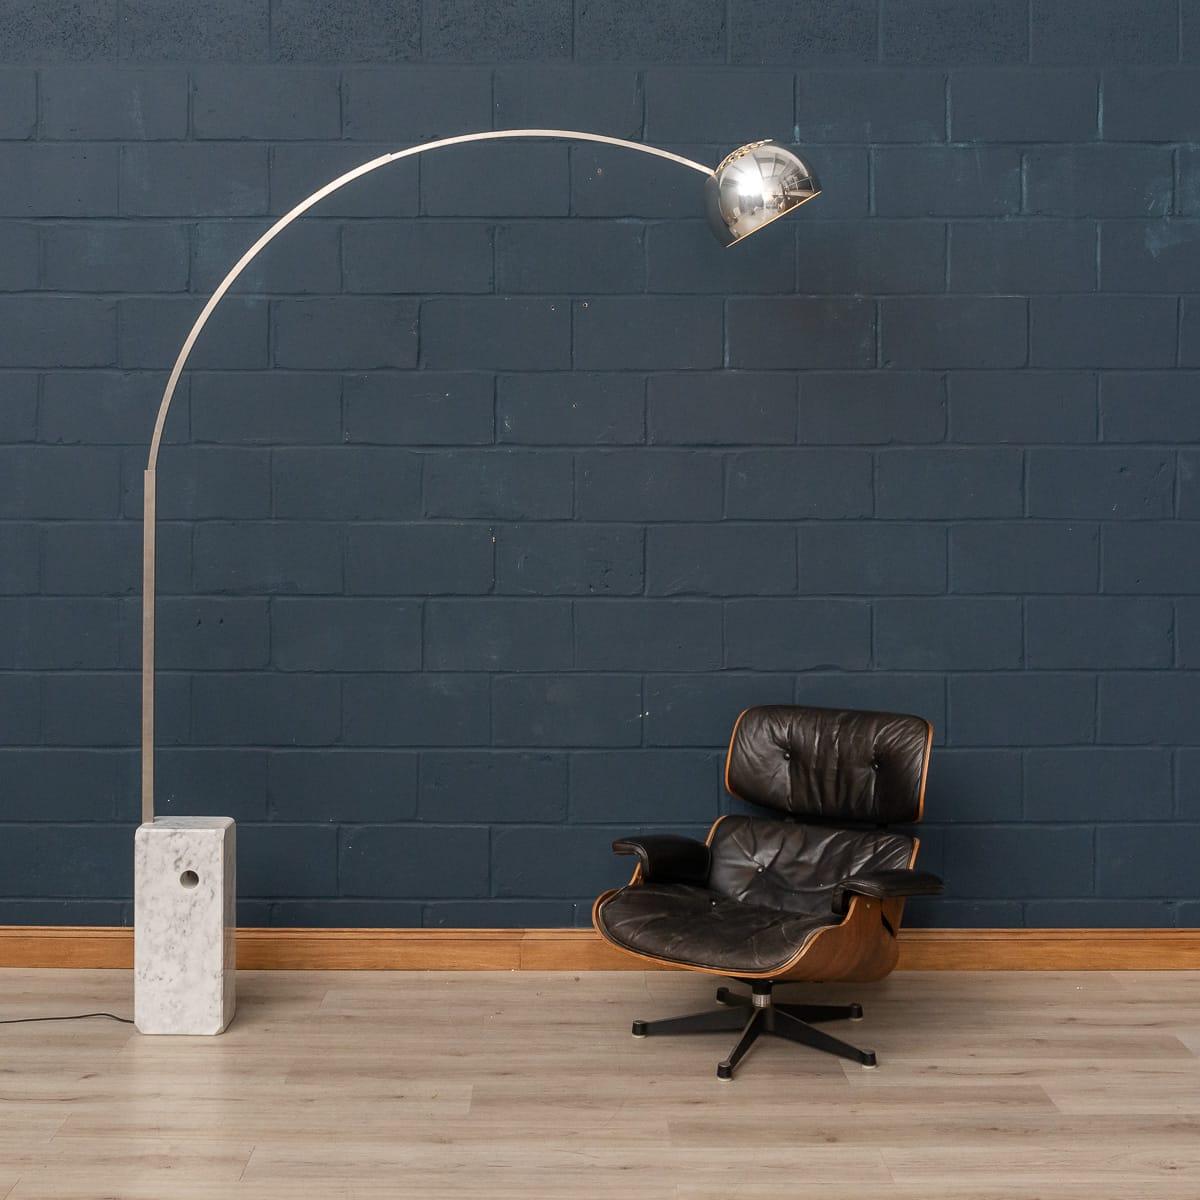 Shining a light on classic 20th century pieces, the Arco is an iconic piece of midcentury lighting from Italian designer Achille Castiglioni. With an arching aluminium frame, domed shade and elegantly carved Carrara marble base, this functional